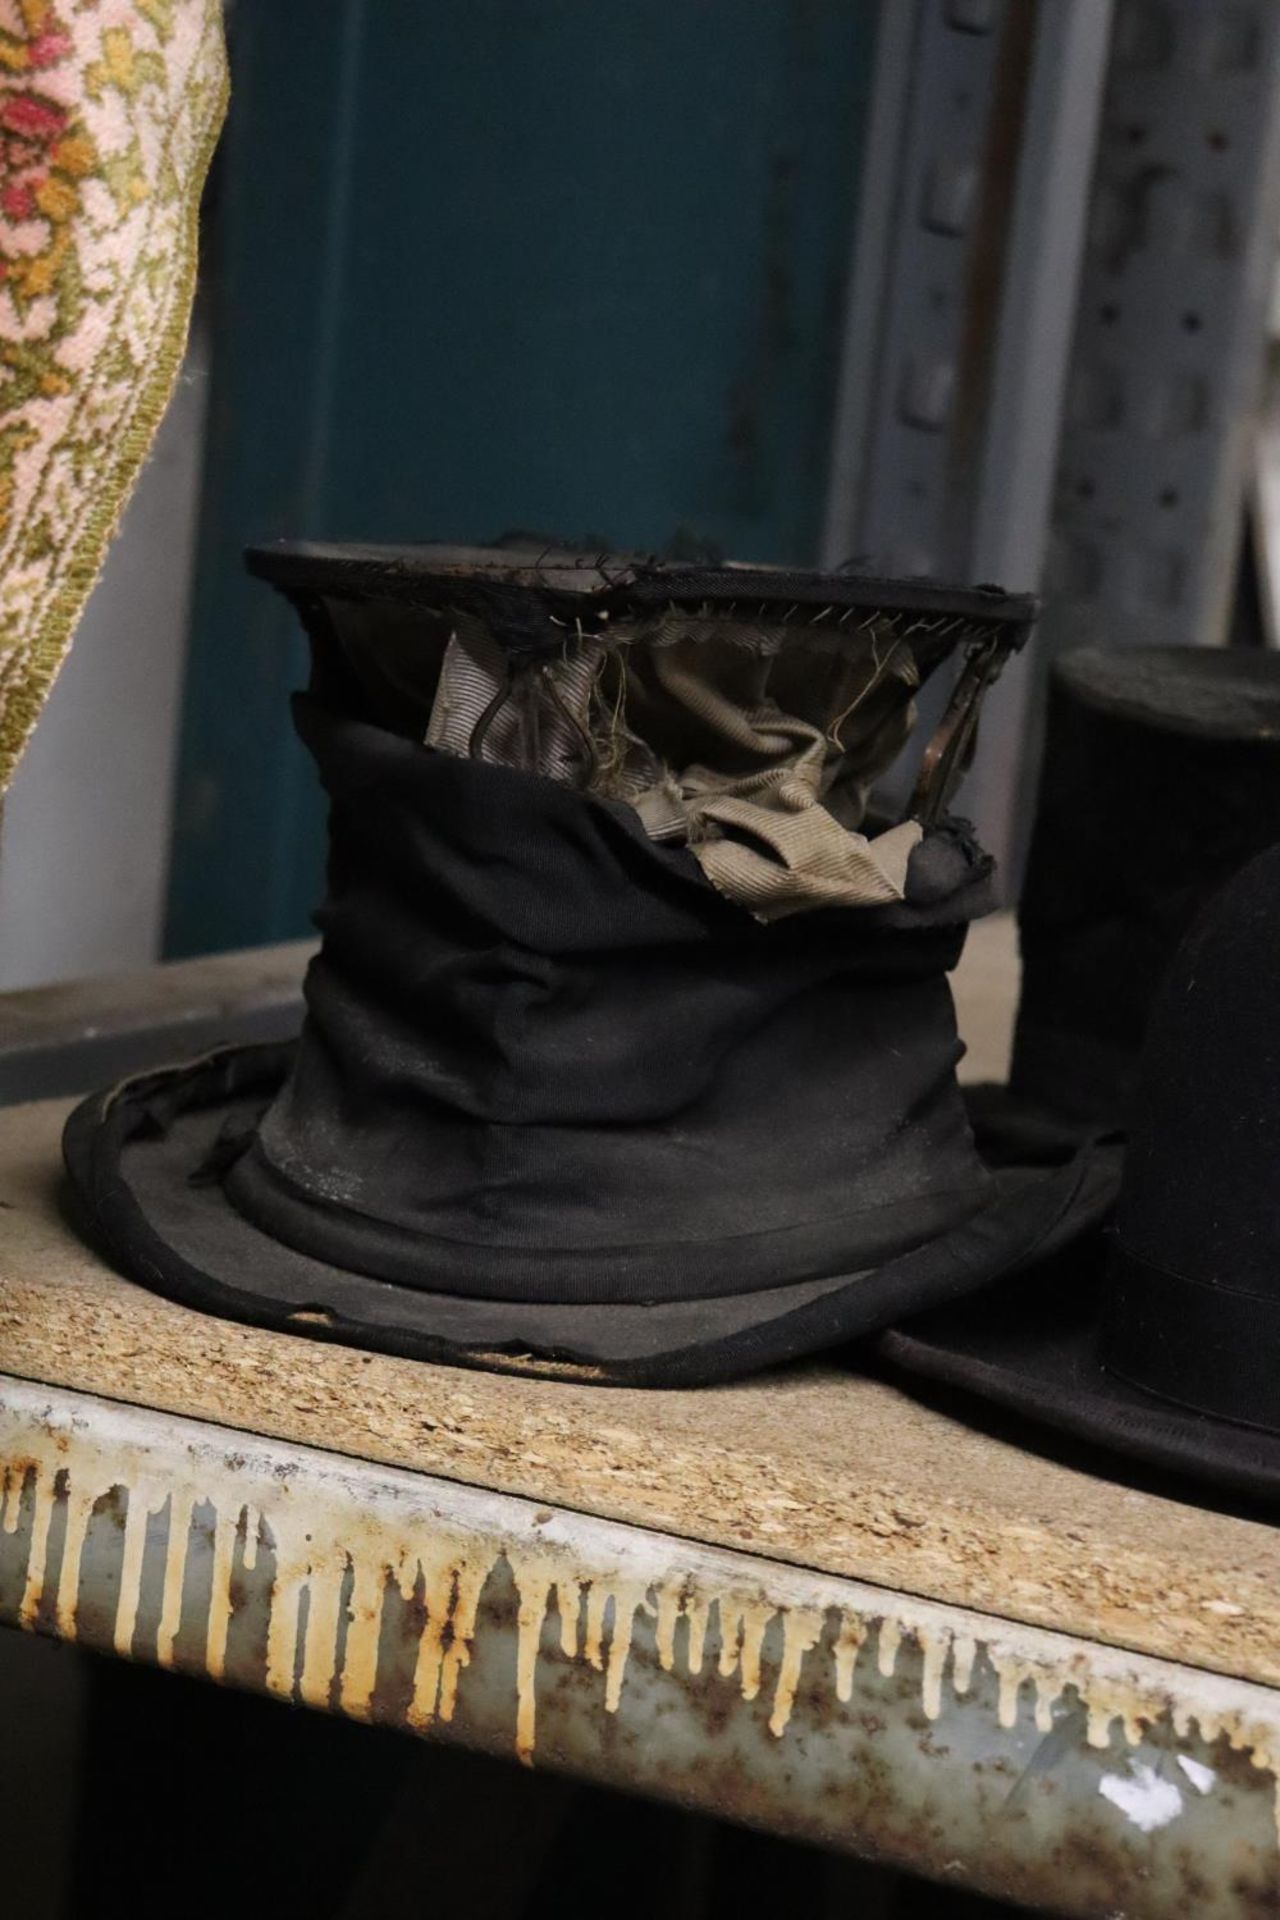 TWO VINTAGE TOP HATS AND A BOWLER HAT - TOP HATS A/F - Image 2 of 6